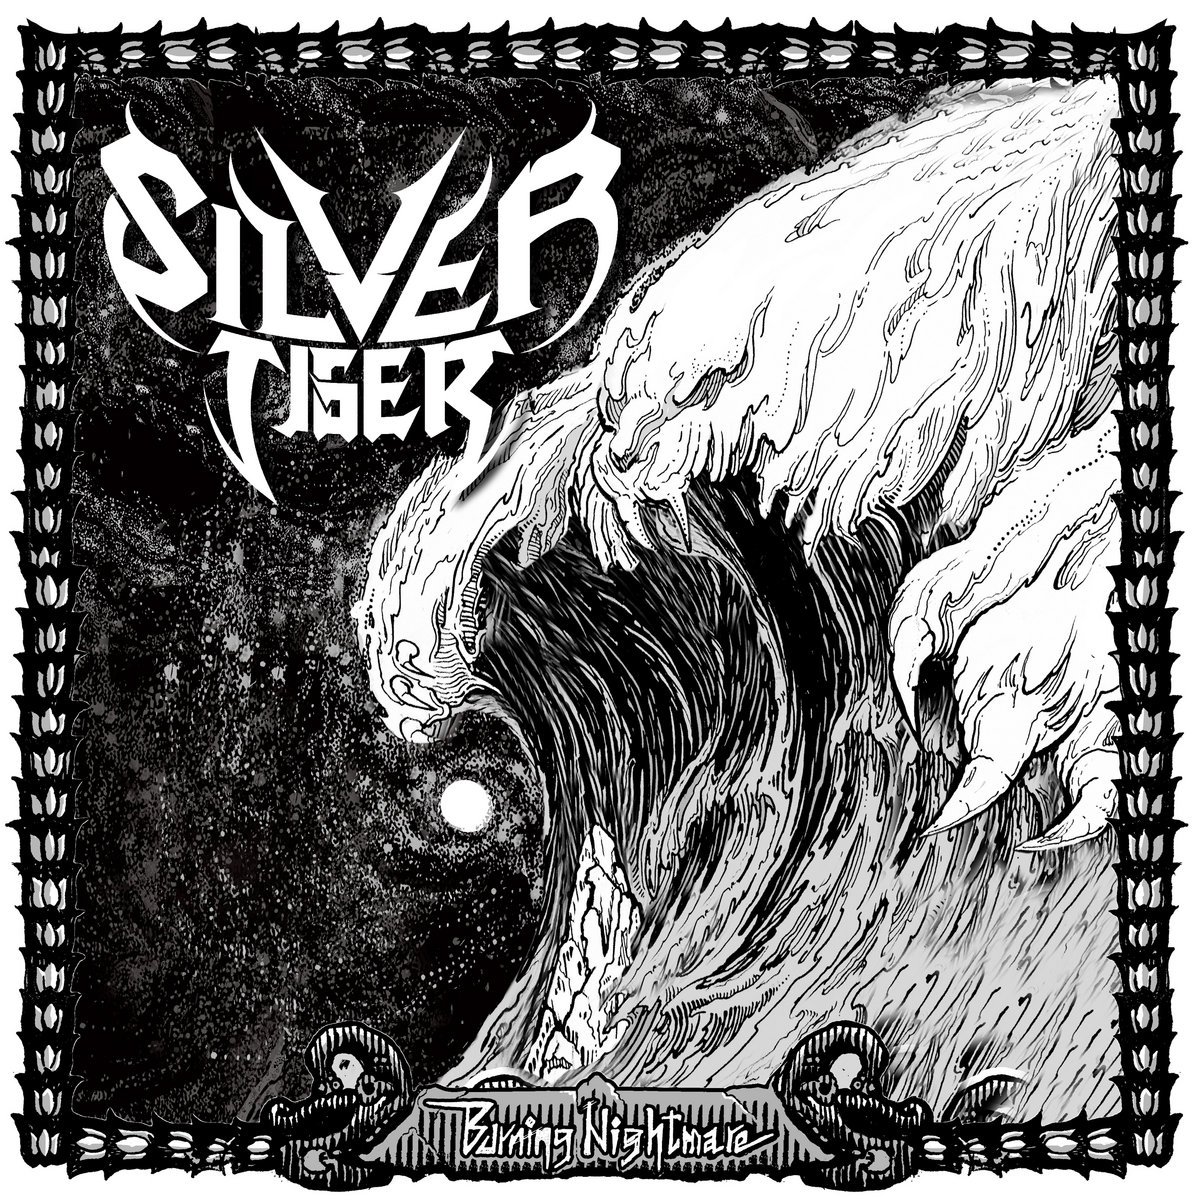 Interview with SILVER TIGER